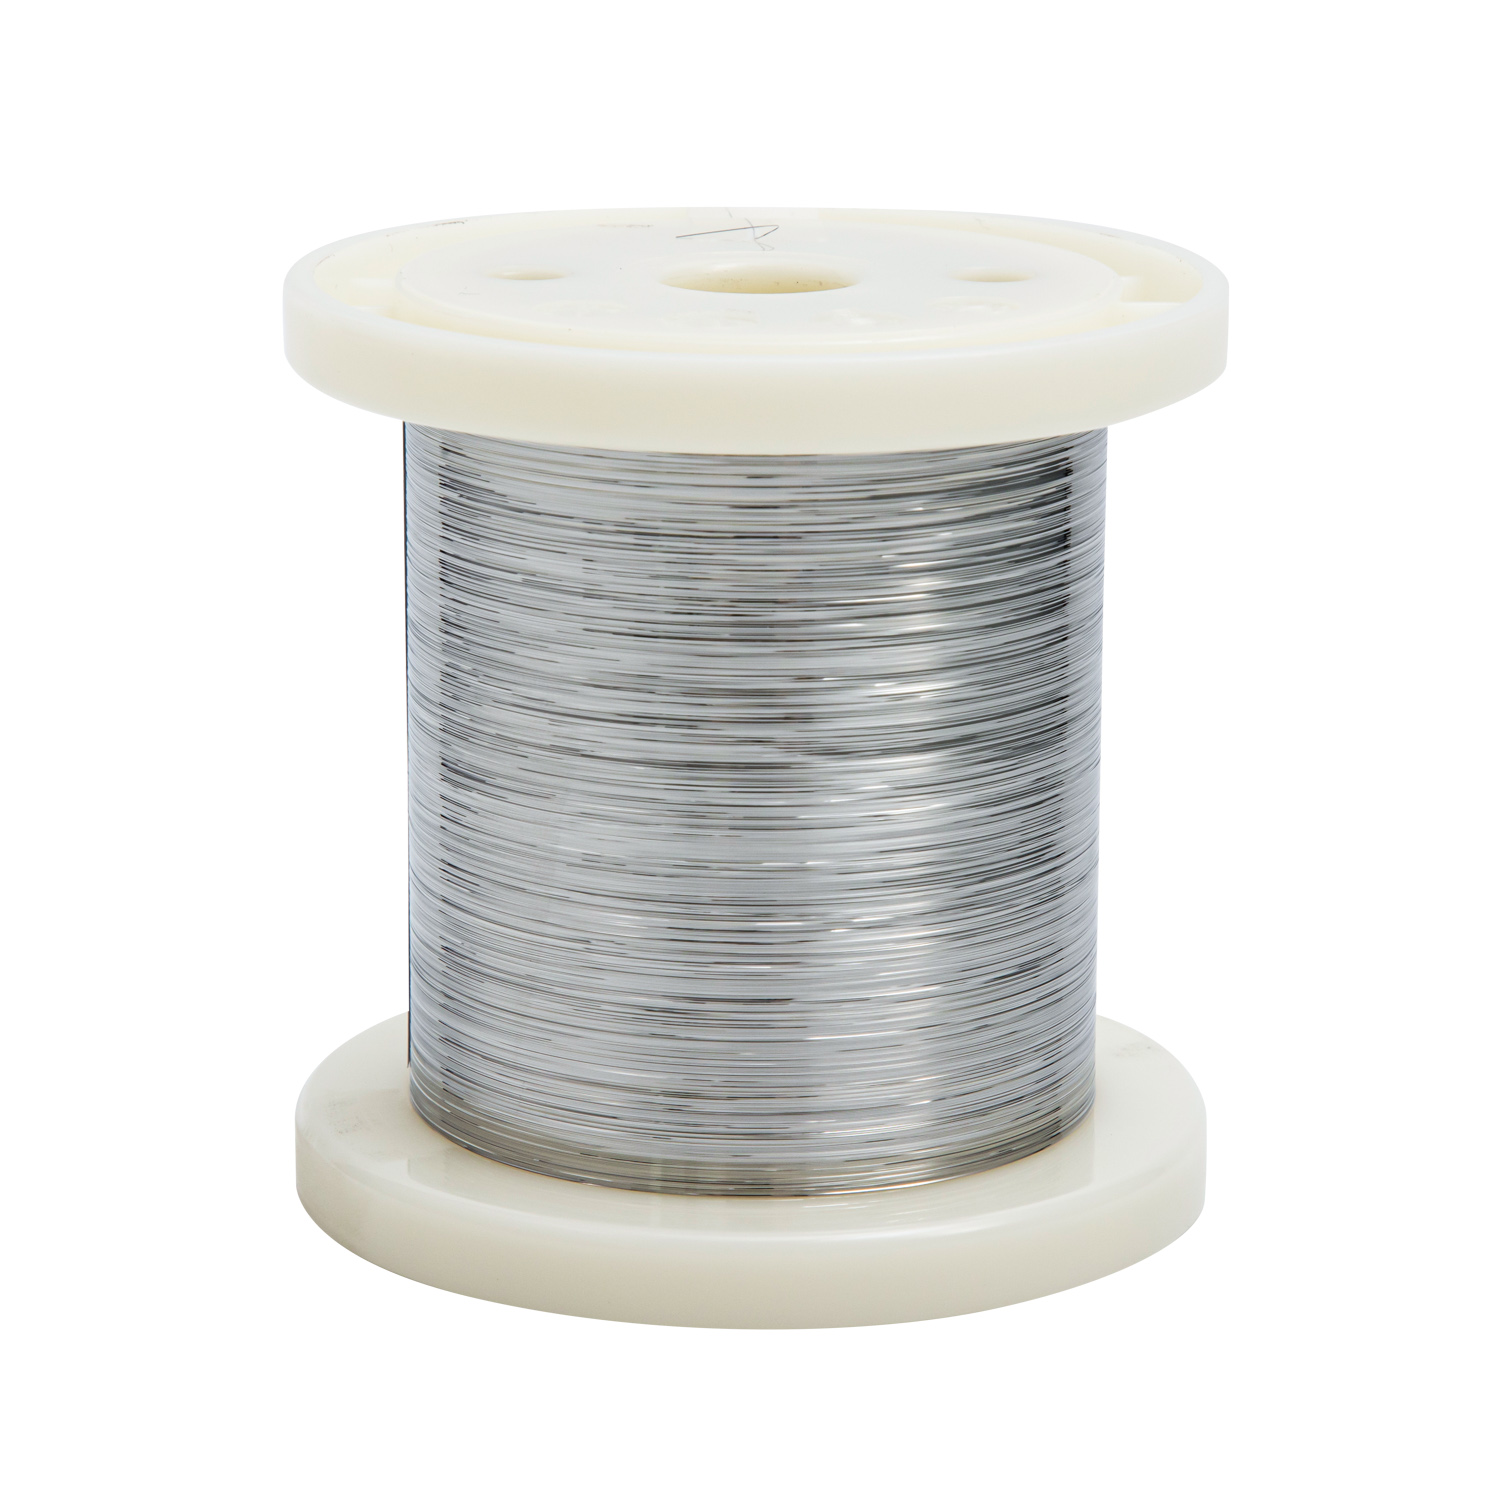 Flat, Spring, Round or Braiding Stainless Steel or Electroplated Medical Wire 0.015mm to 0.5 mm for Ultrasounds, Catheters, Cardiac Systems